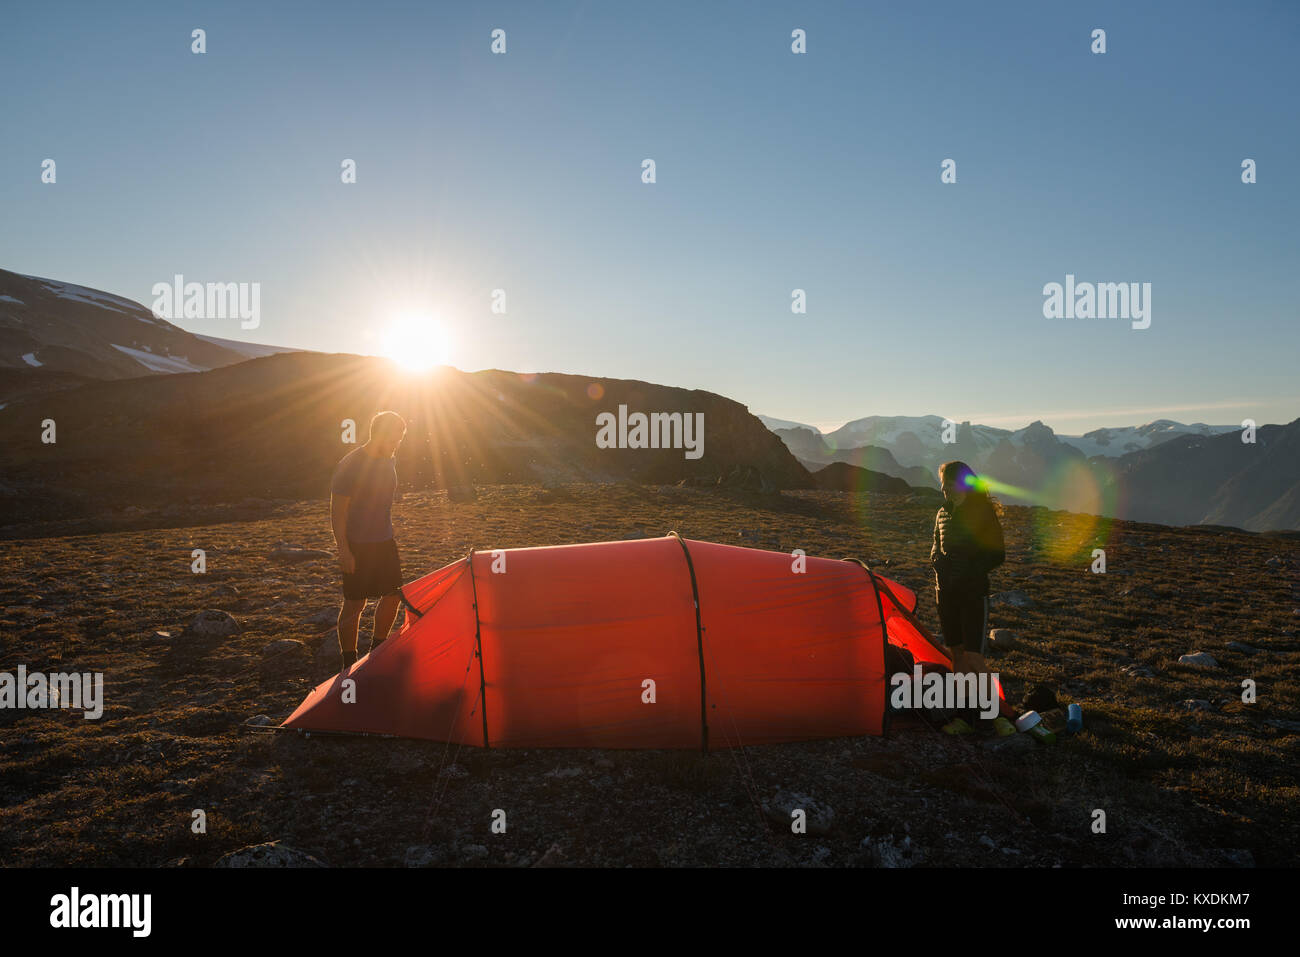 Two persons with red tent, mountain scenery, evening light, Greenland Stock Photo